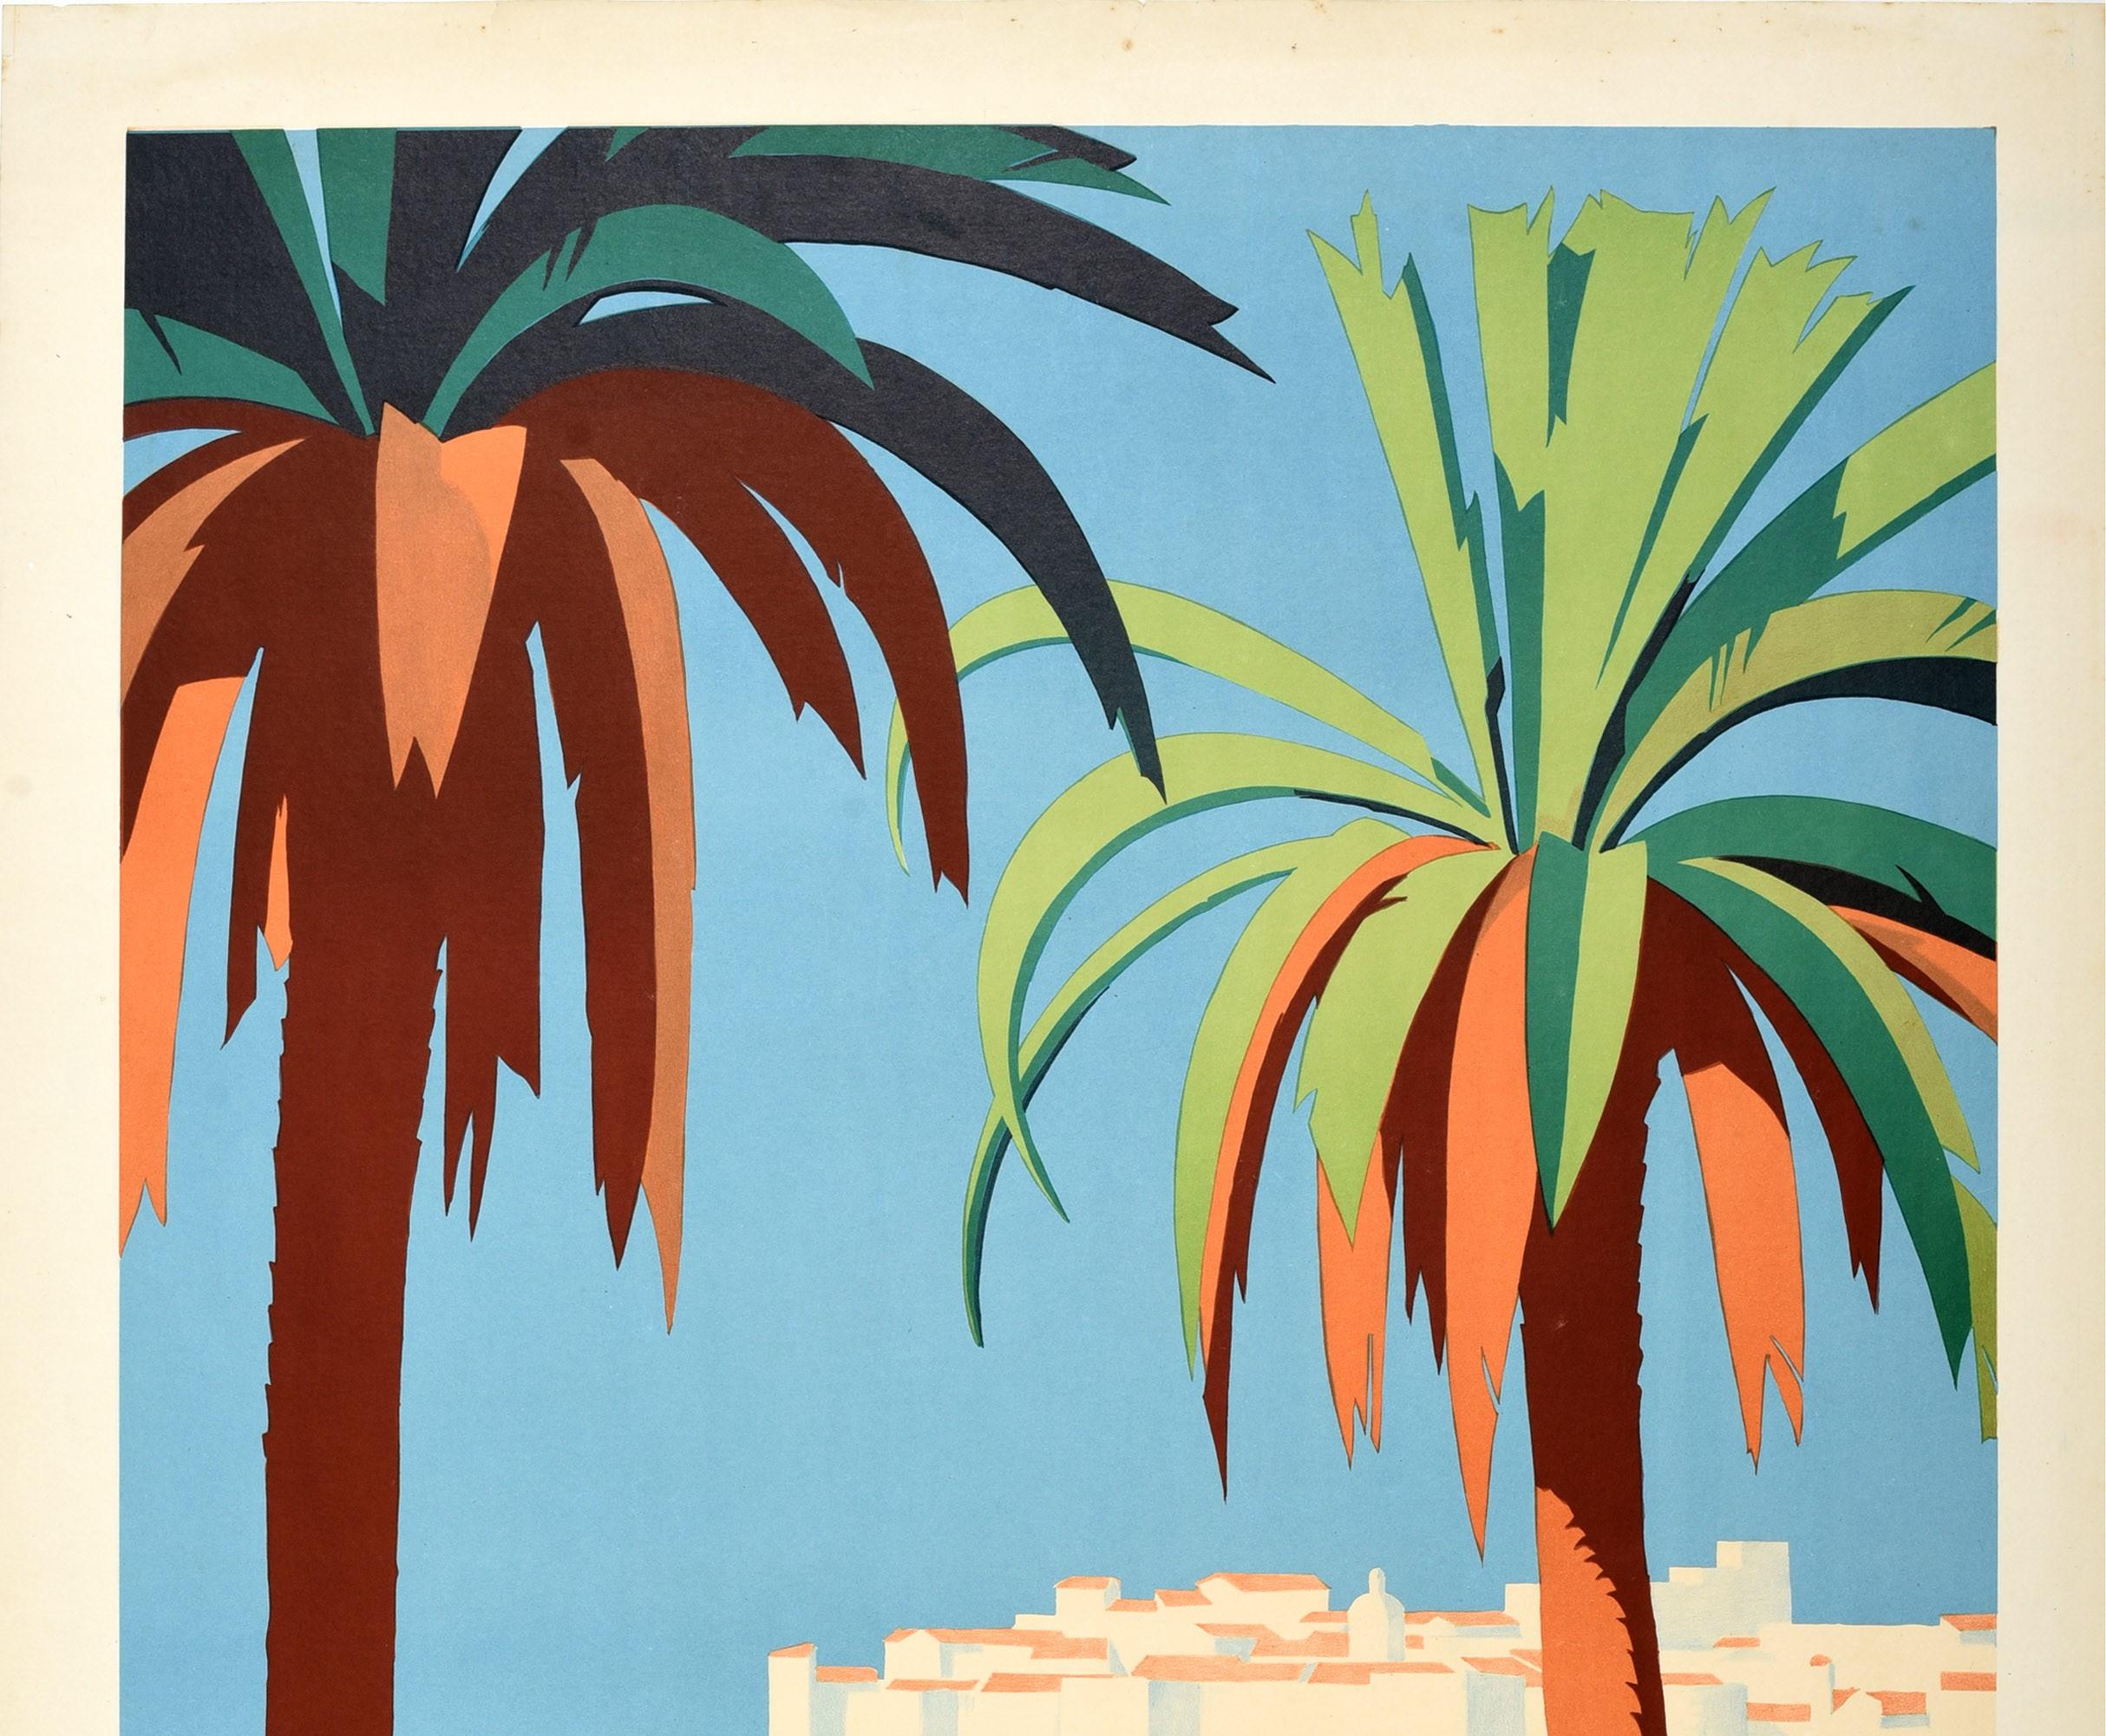 Original vintage travel advertising poster for Dubrovnik The Gem of the Jugoslav Adriatic featuring a stunning Art Deco style illustration by Hans Wagula (1894-1964) depicting a view of the clear blue Adriatic Sea with tall palm trees in the